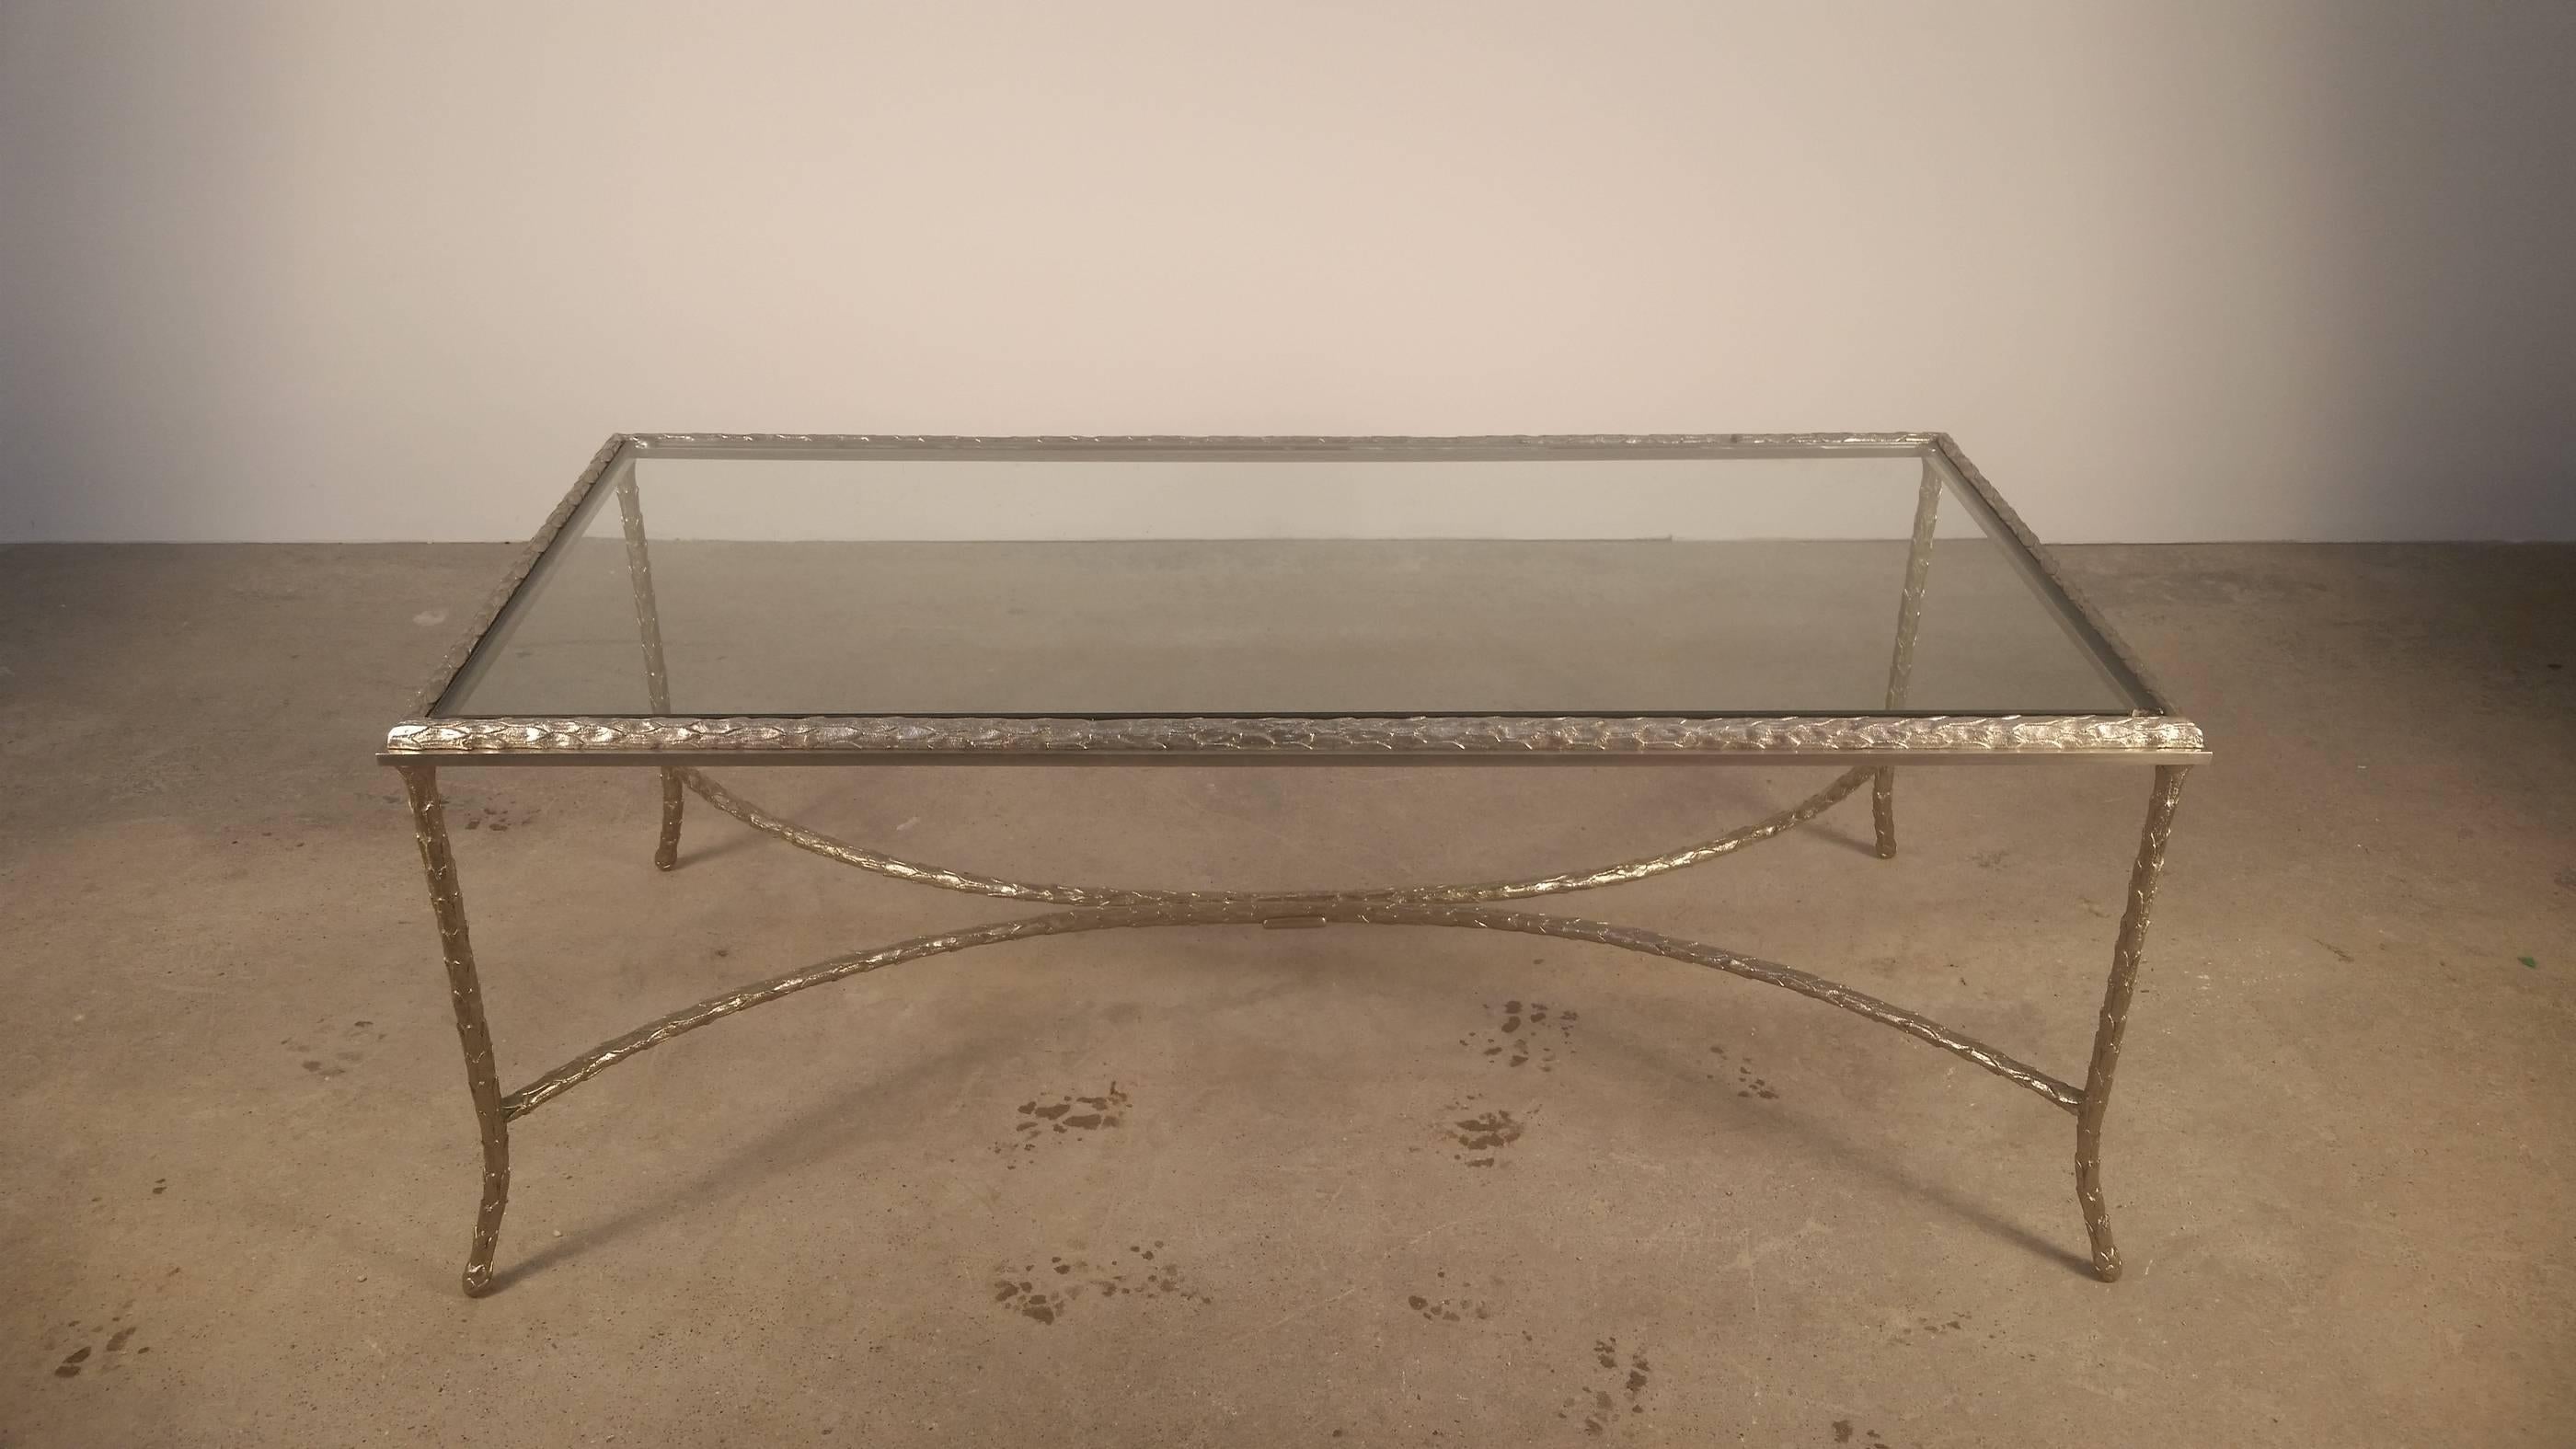 Large bronze and glass coffee table by Maison Baguès, French, 1940s, with seldom seen silvered finish.